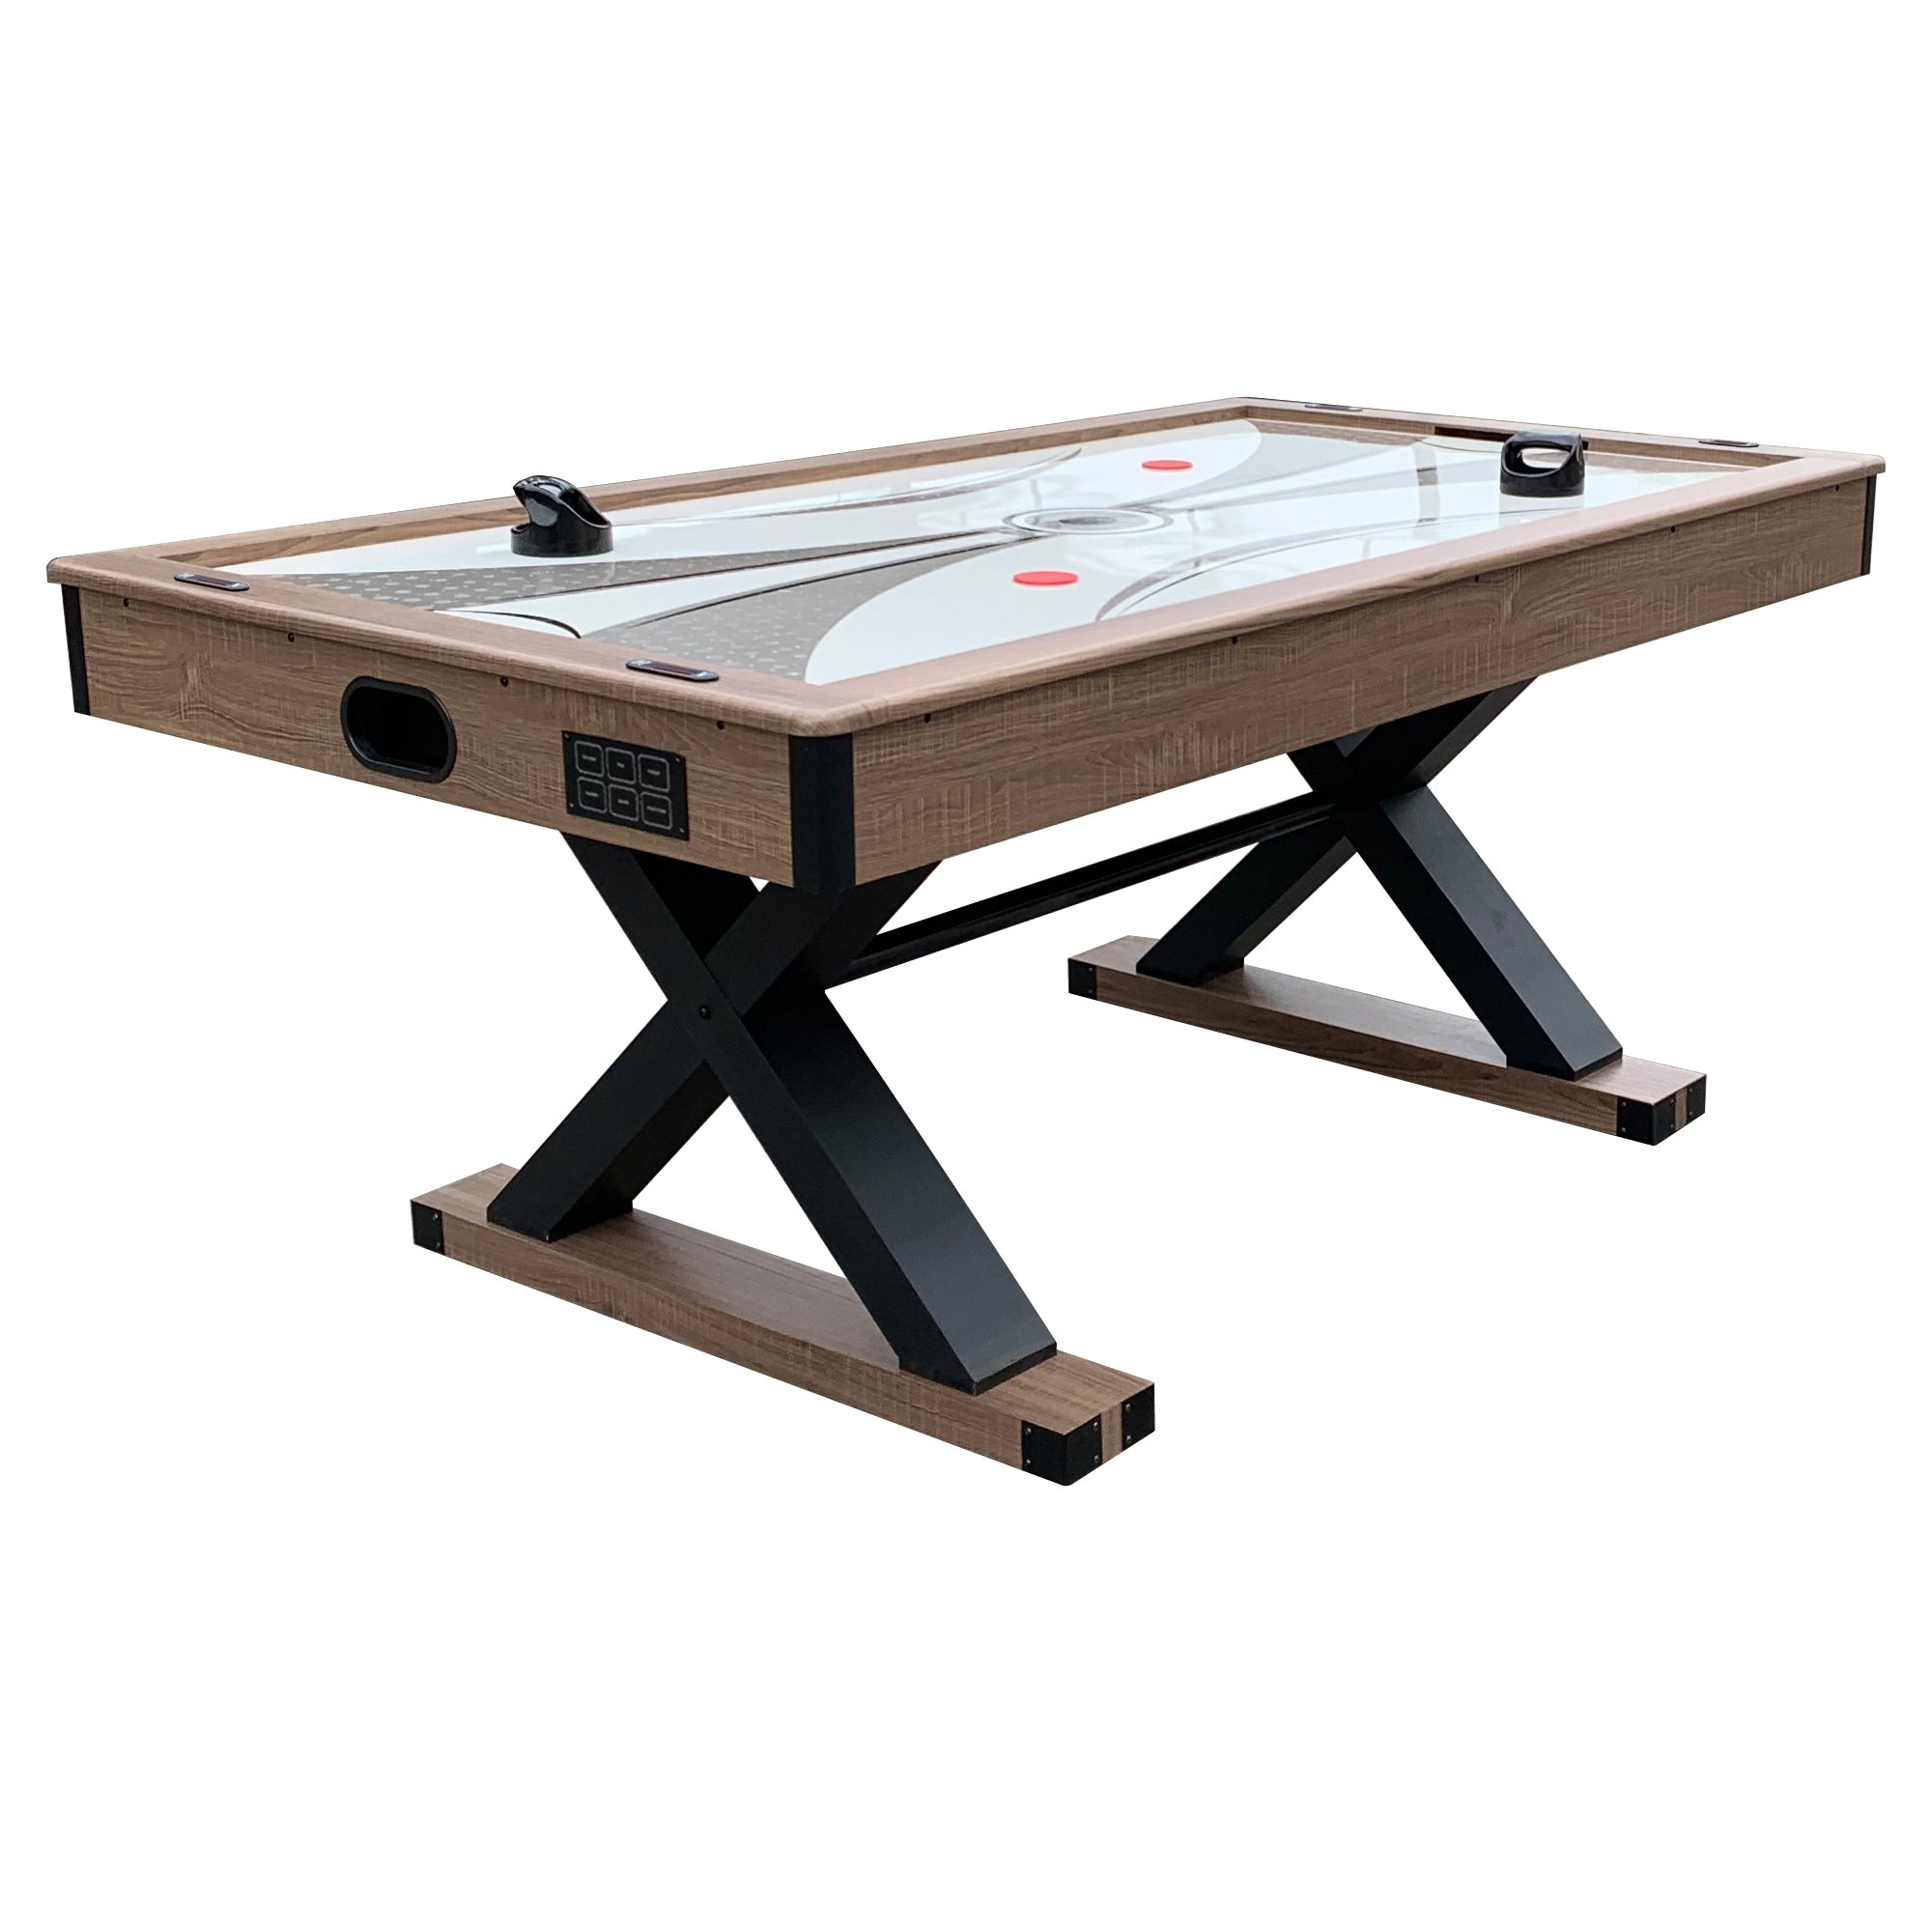 Excalibur 6 Foot Air Hockey Table with LED Scoring and Table Tennis Top